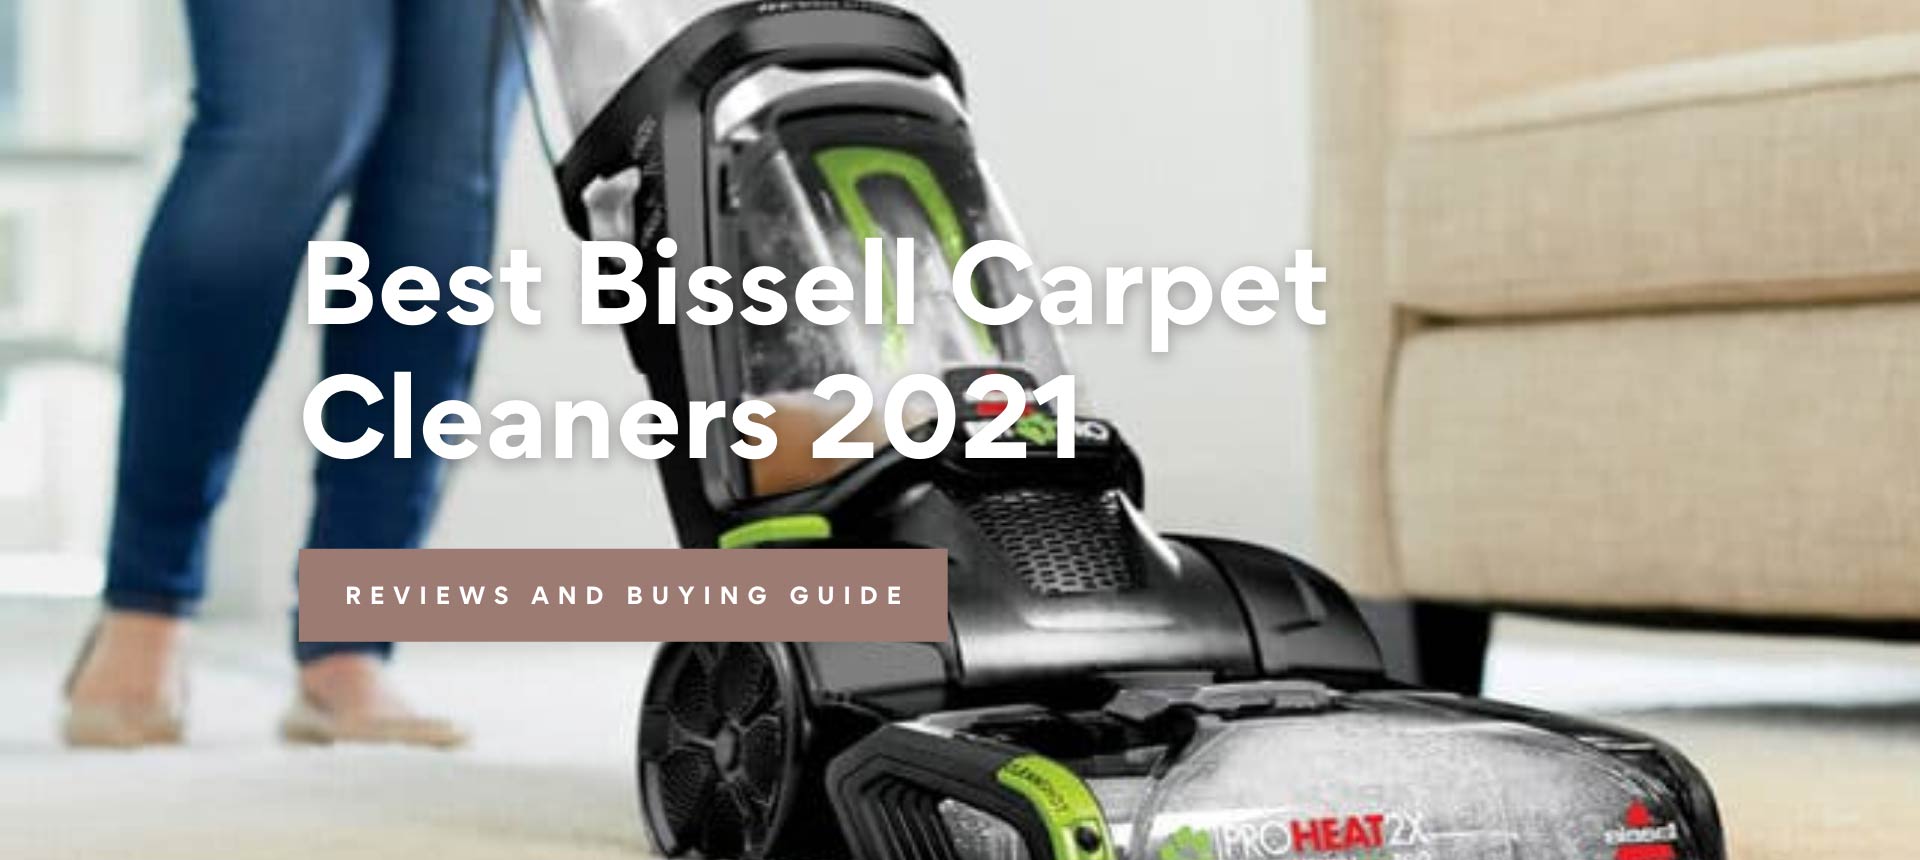 Best Bissell Carpet Cleaners 2021